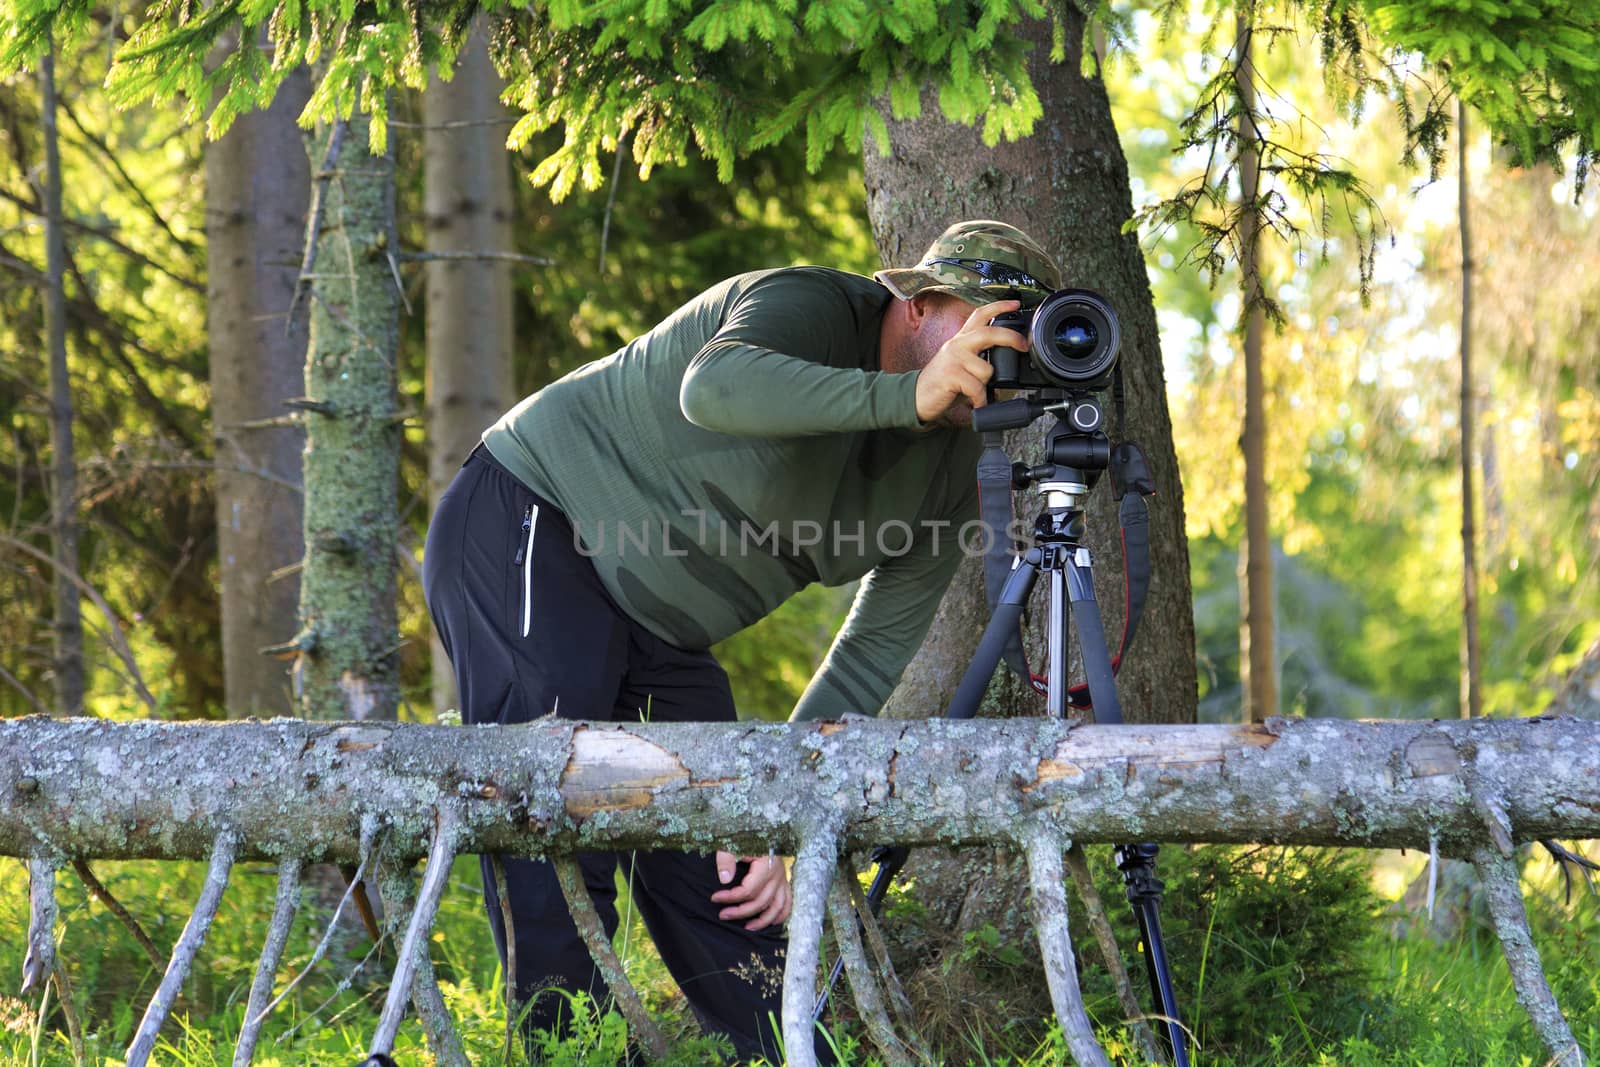 A photographer sets up a camera and hides in the shade of a tree behind spruce branches at the edge of the forest against a sunny summer day.